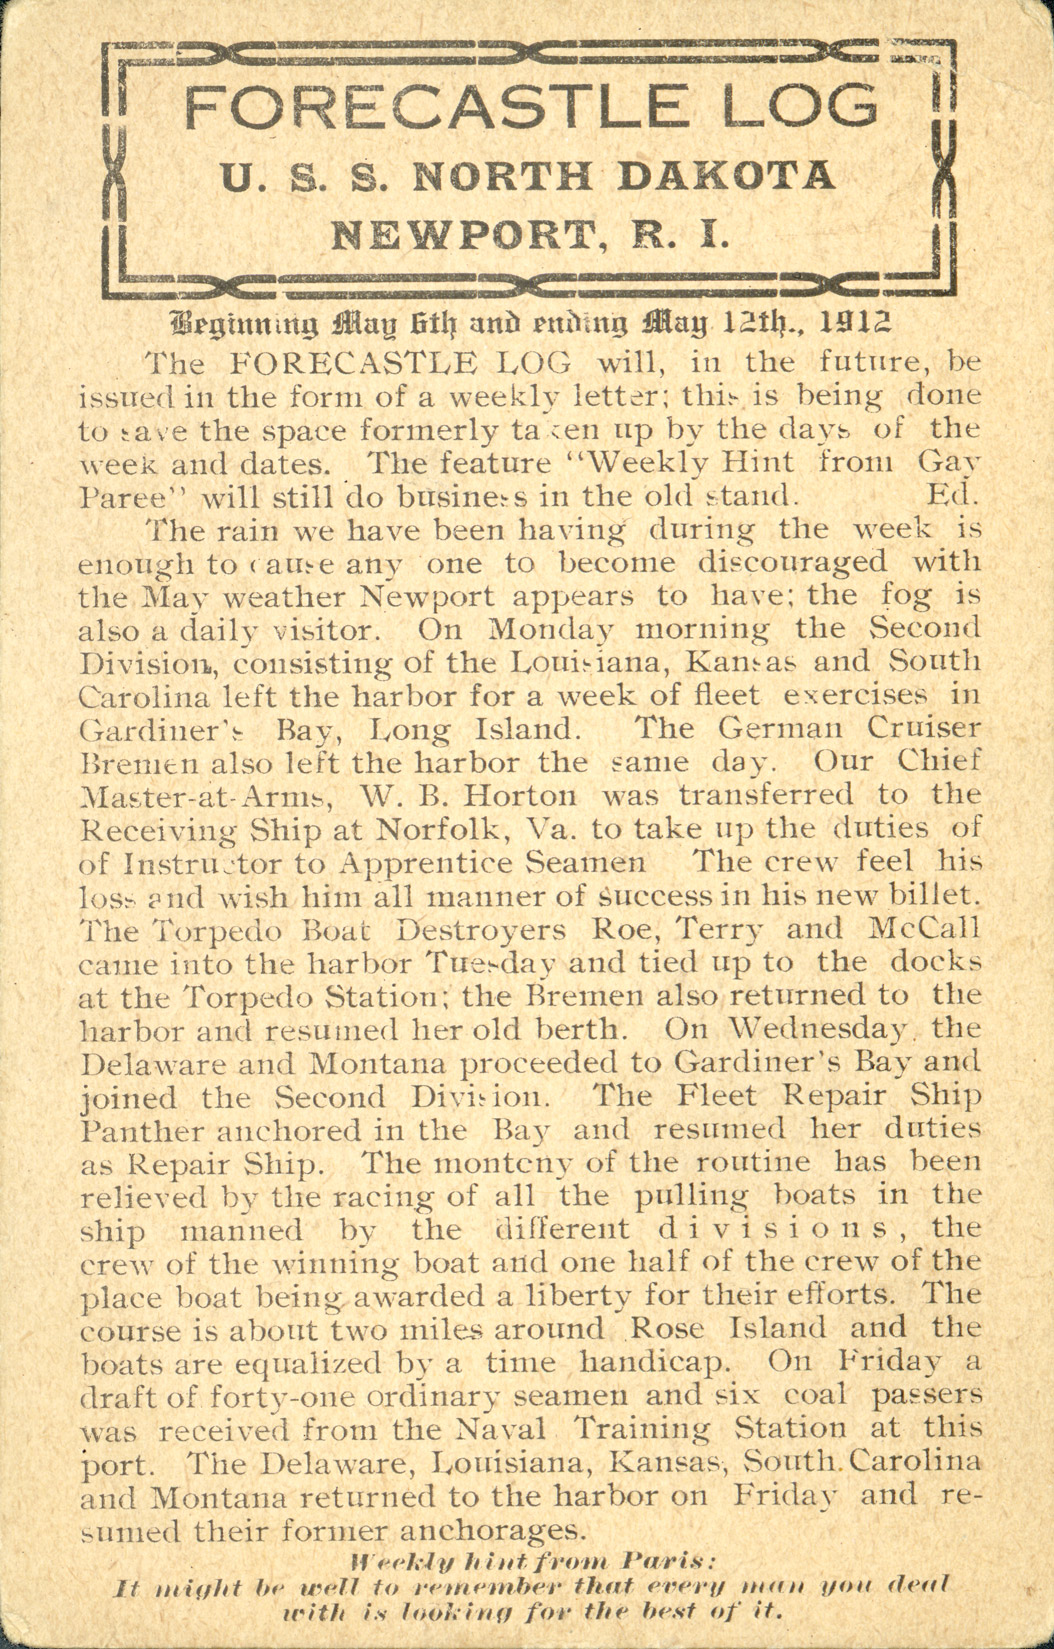 The first edition of the Forecastle Log